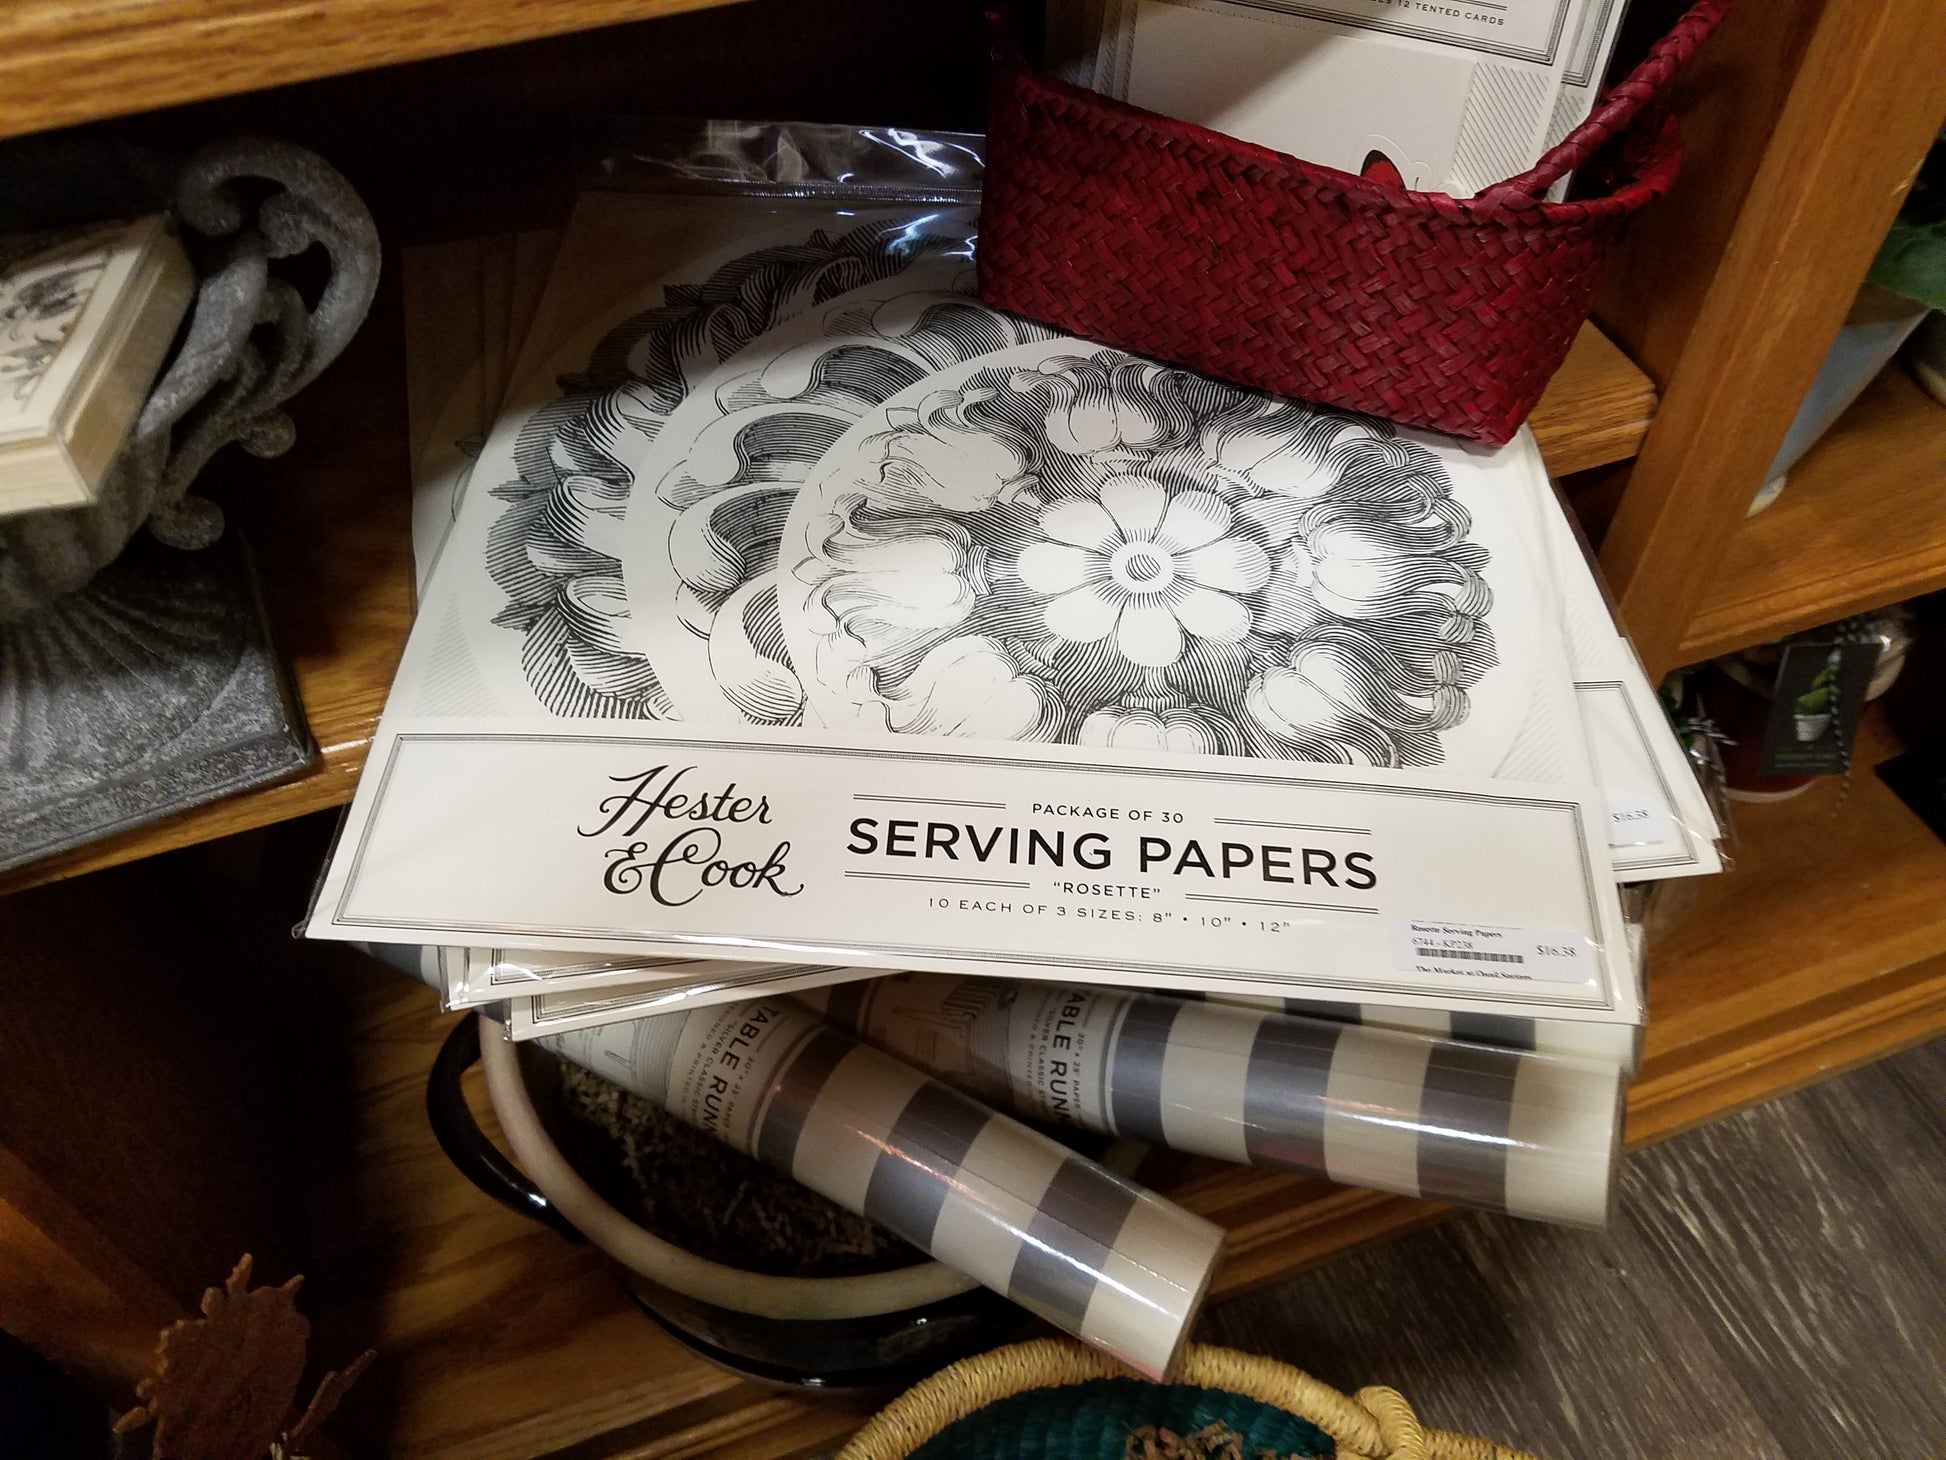 Showing the packaging of the serving papers